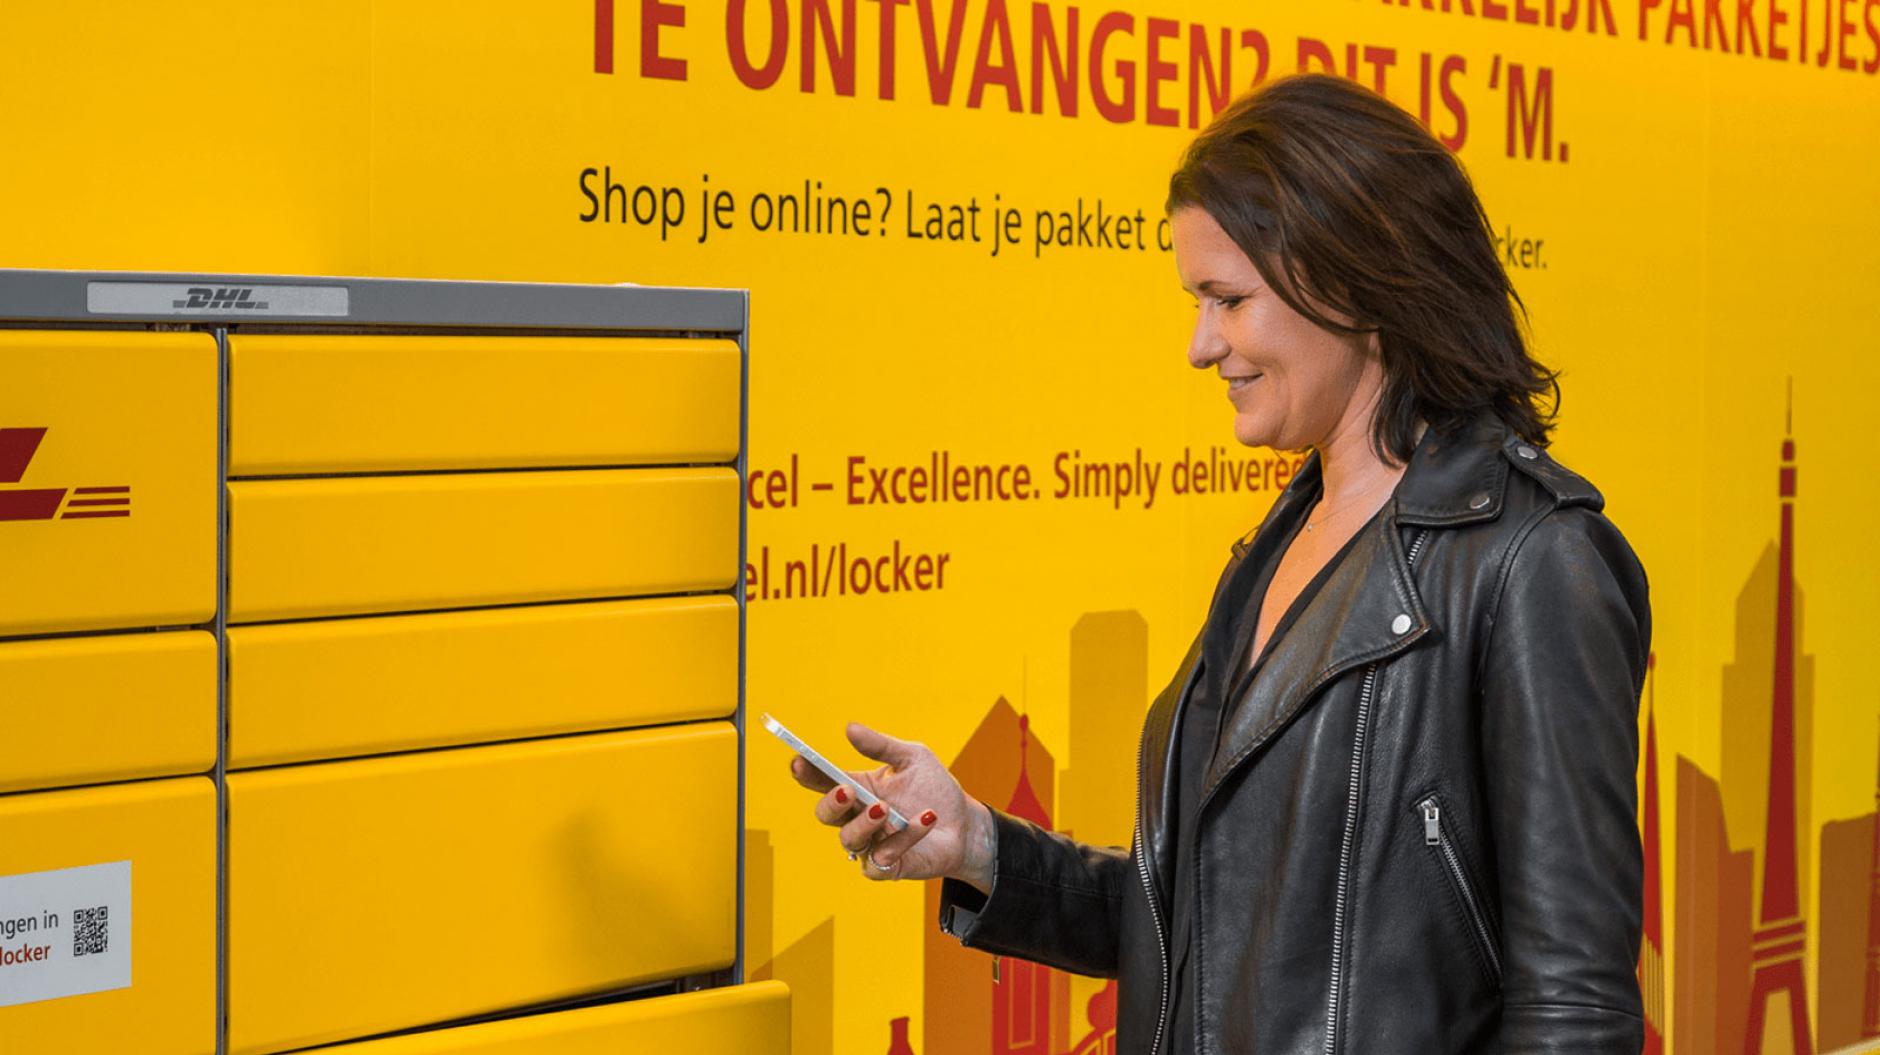 Dhl drop off point